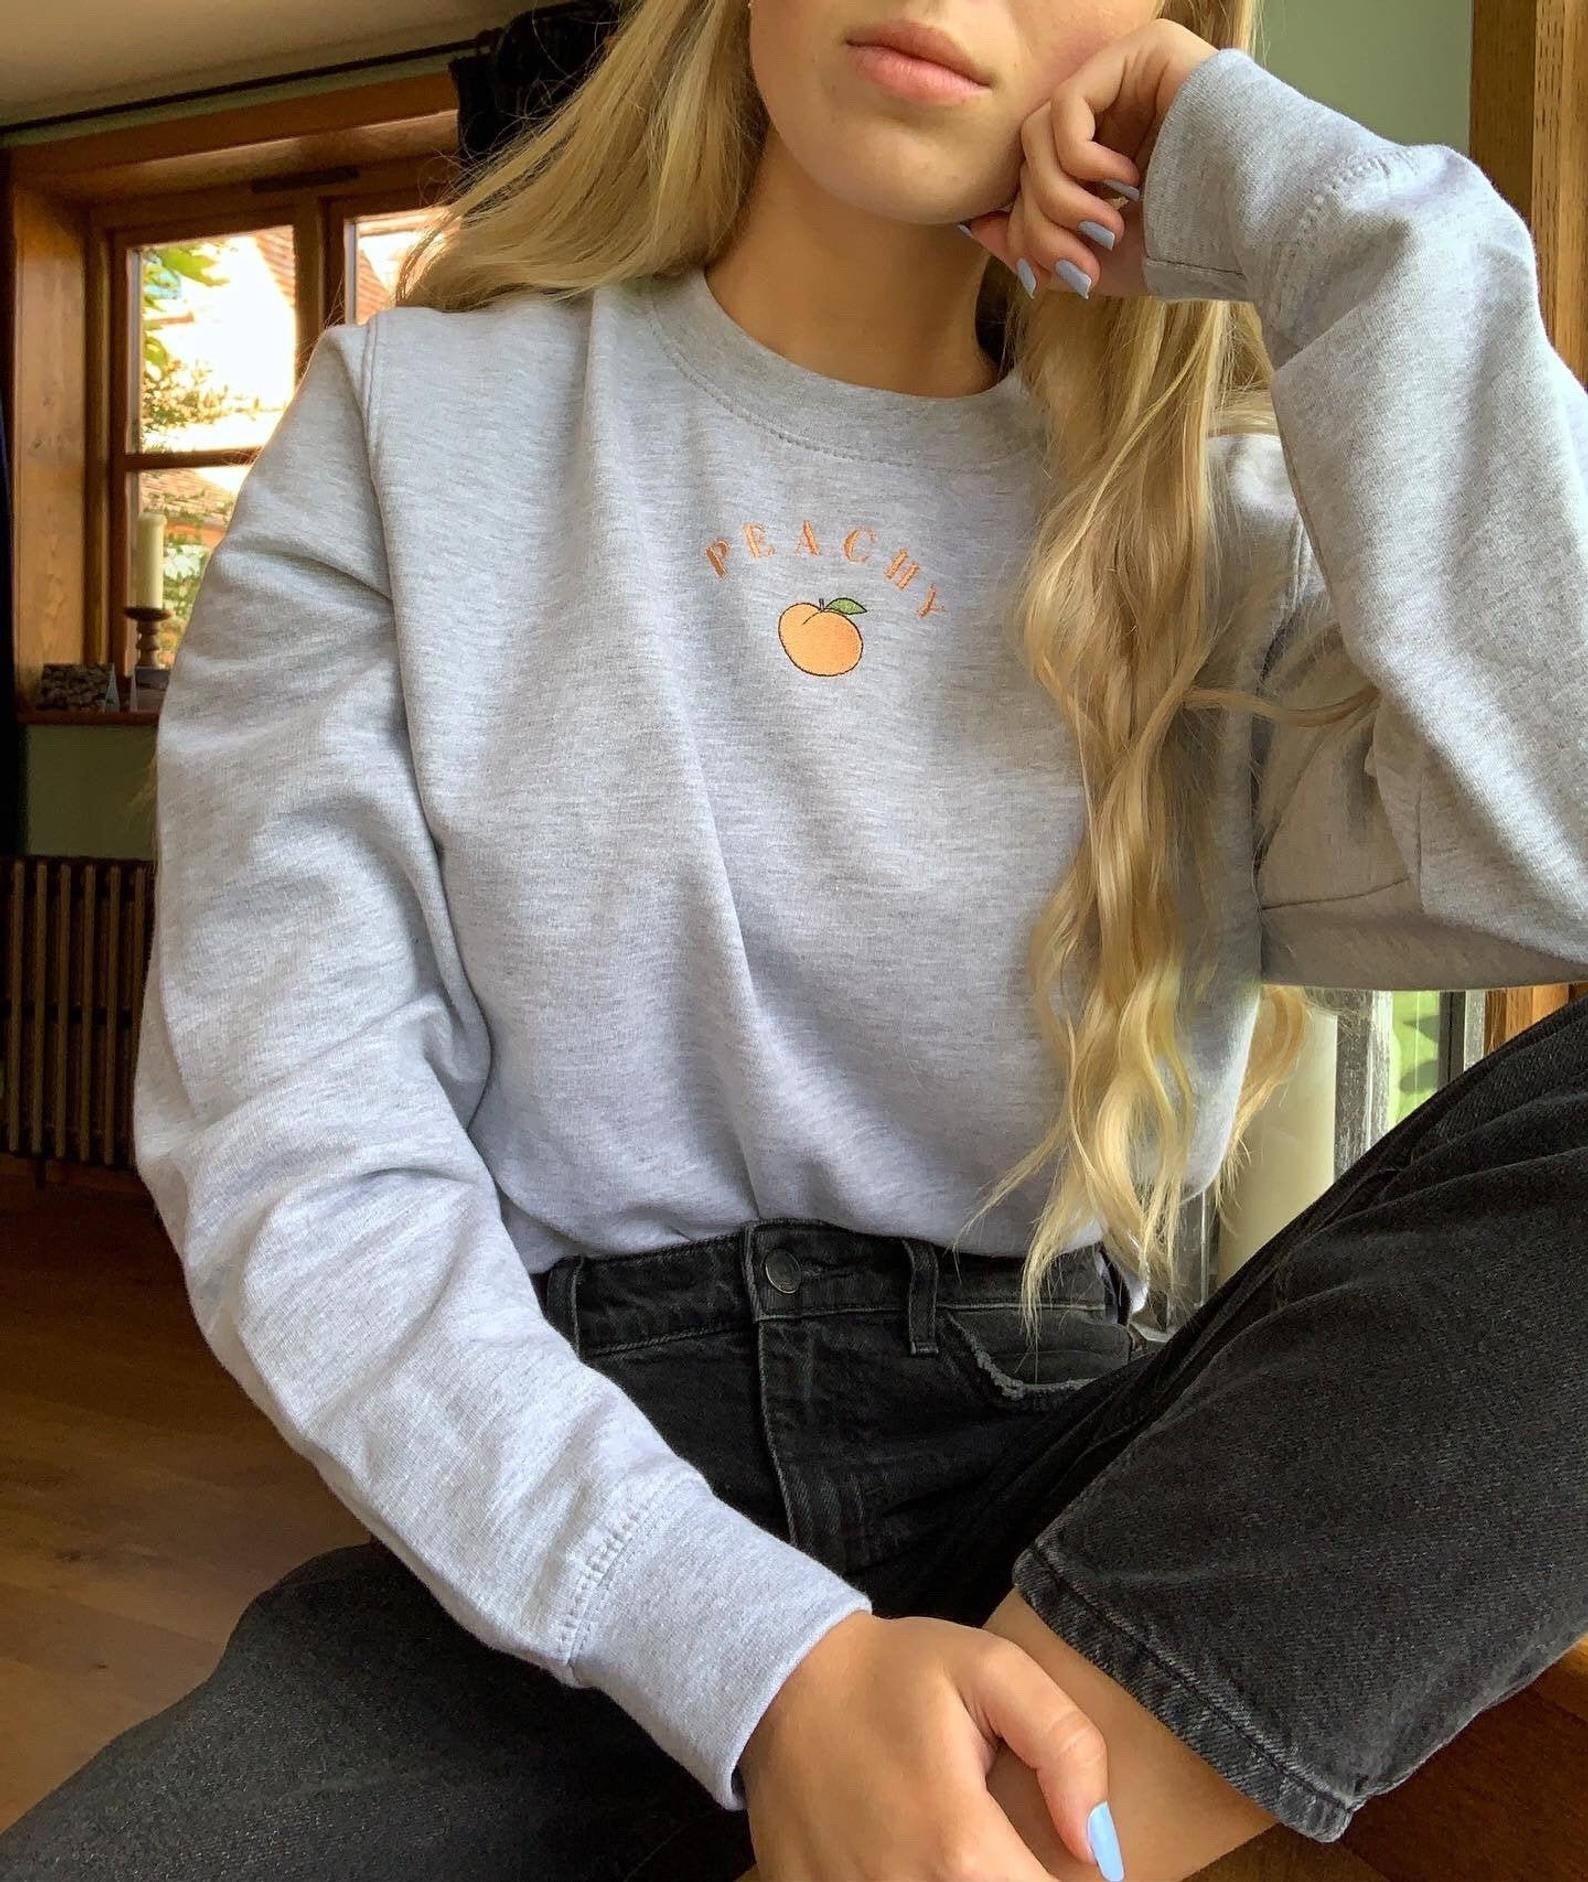 model wearing gray crew neck sweater with tiny peach embroidered on front with words &quot;peachy&quot;